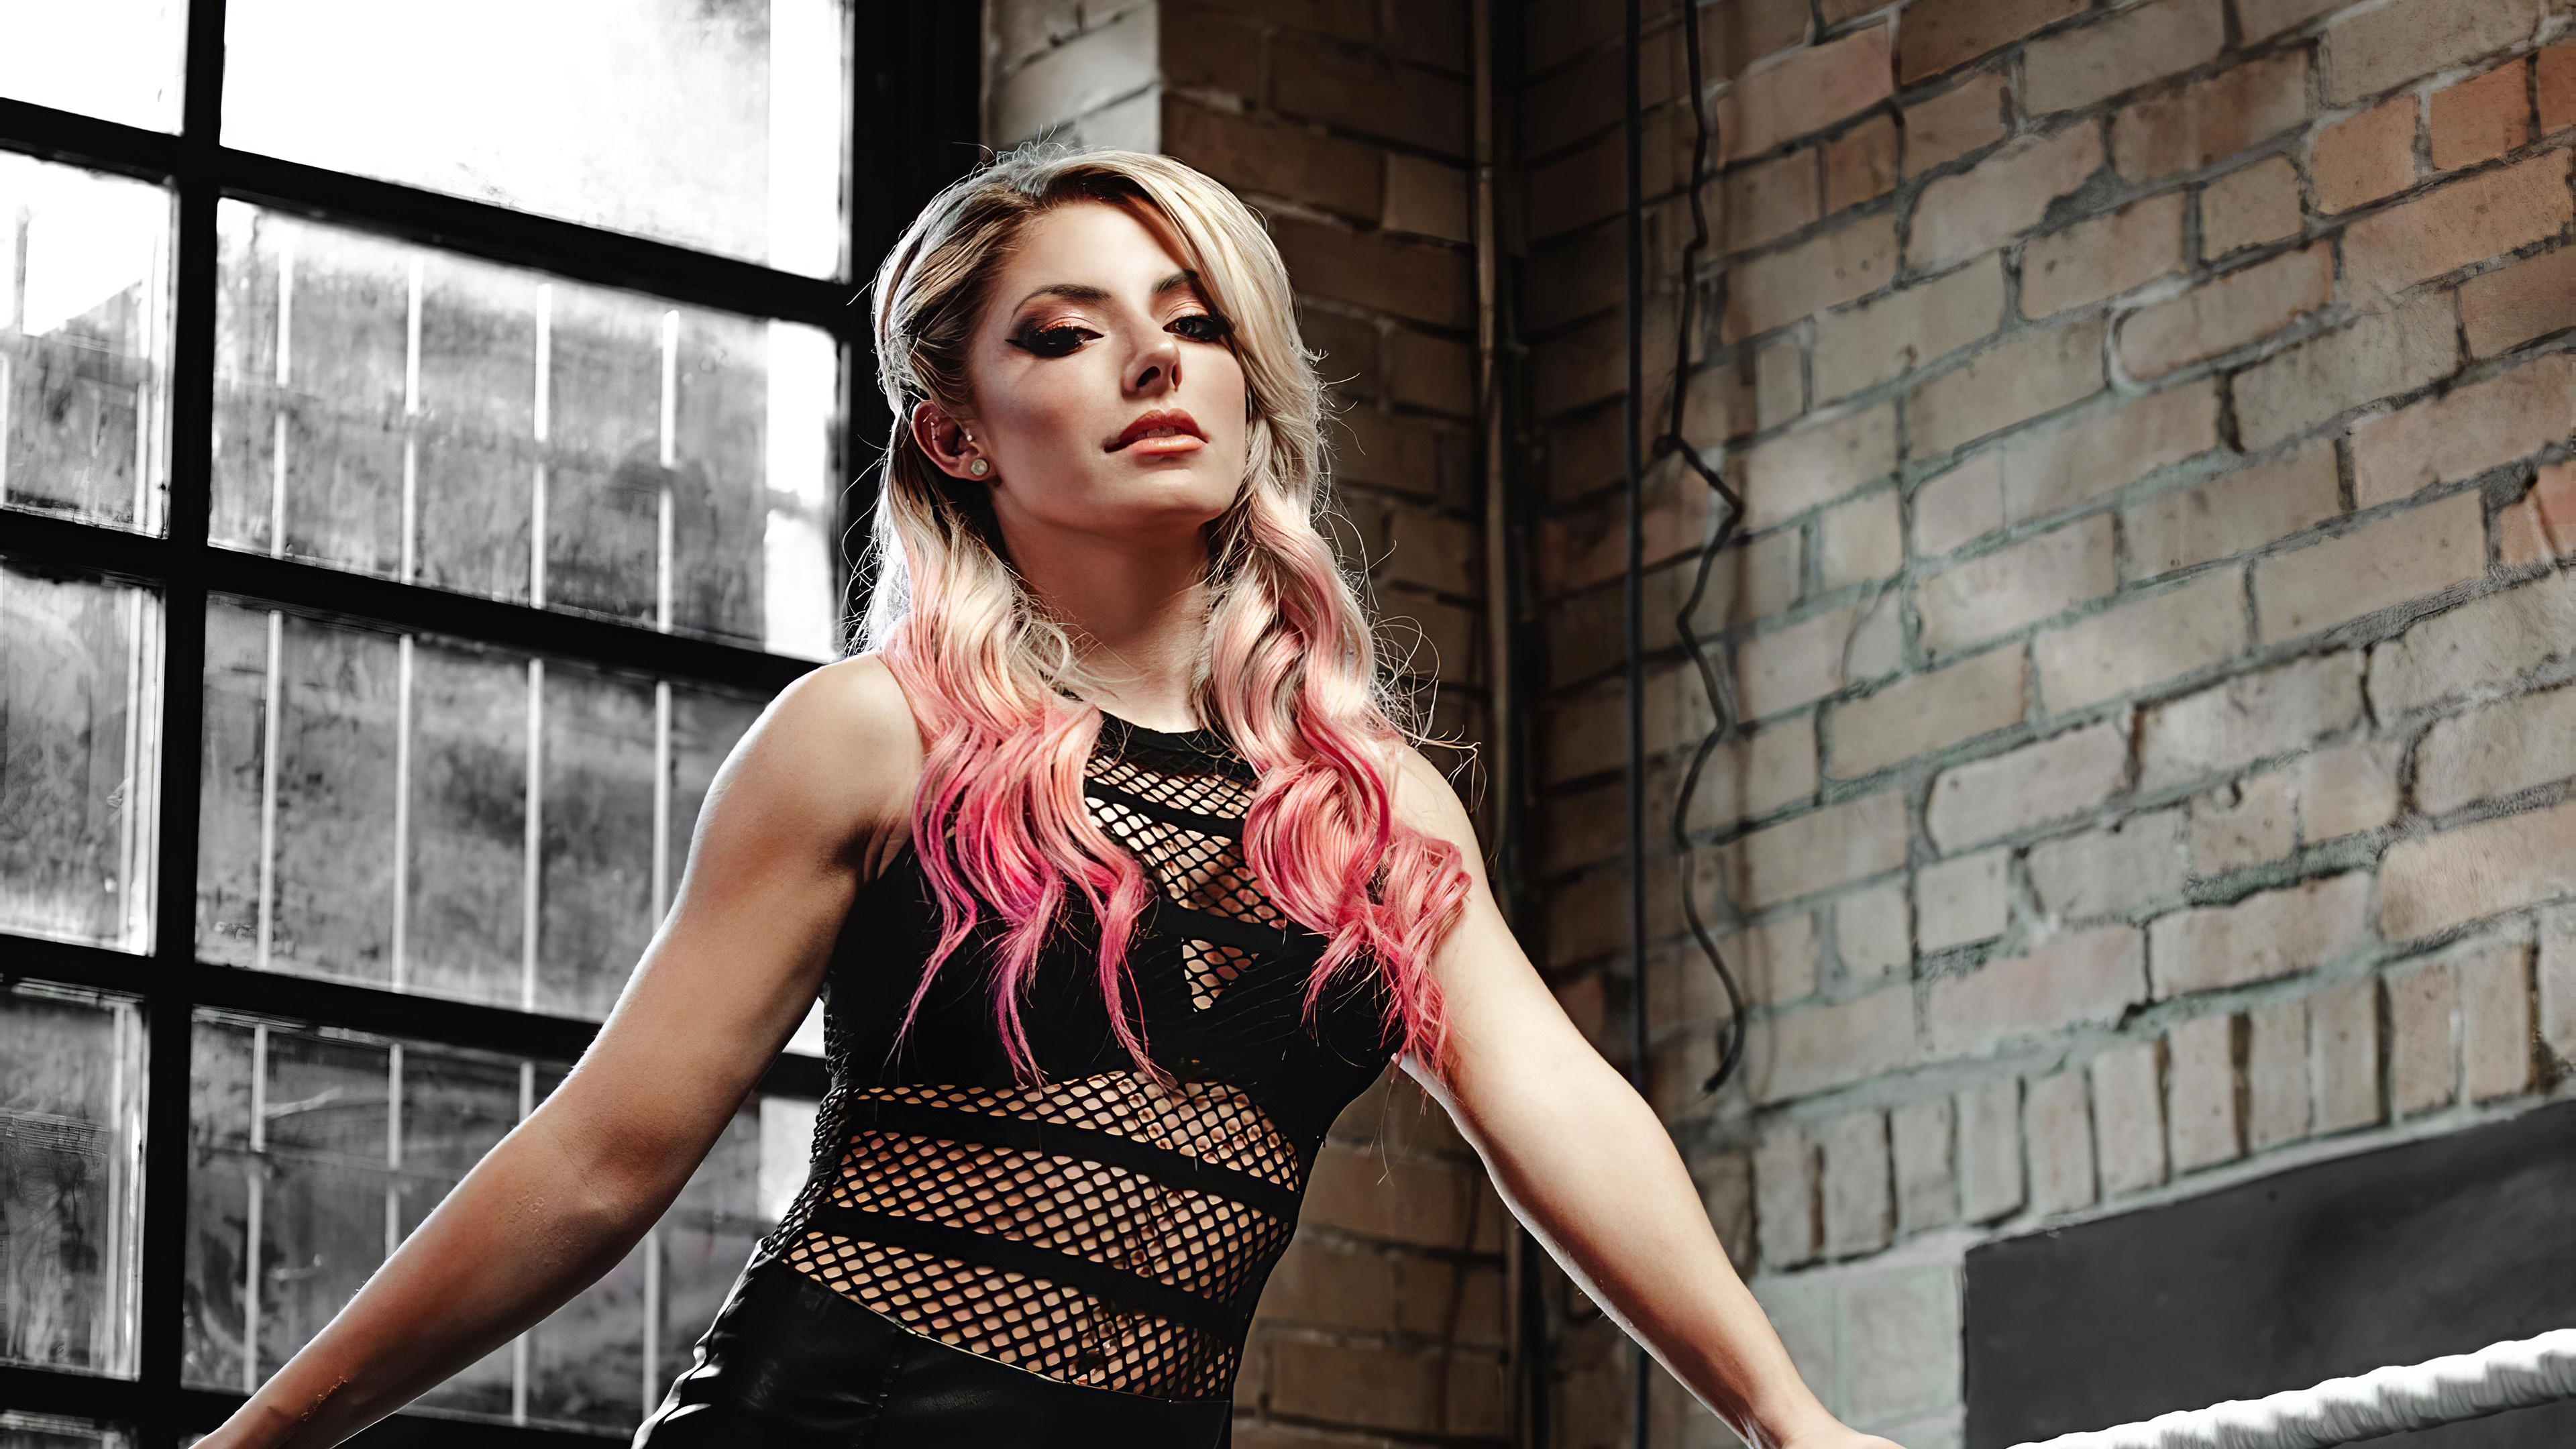 2048x1152 Alexa Bliss Wwe Photoshoot 4k 2048x1152 Resolution Hd 4k Wallpapers Images Backgrounds Photos And Pictures